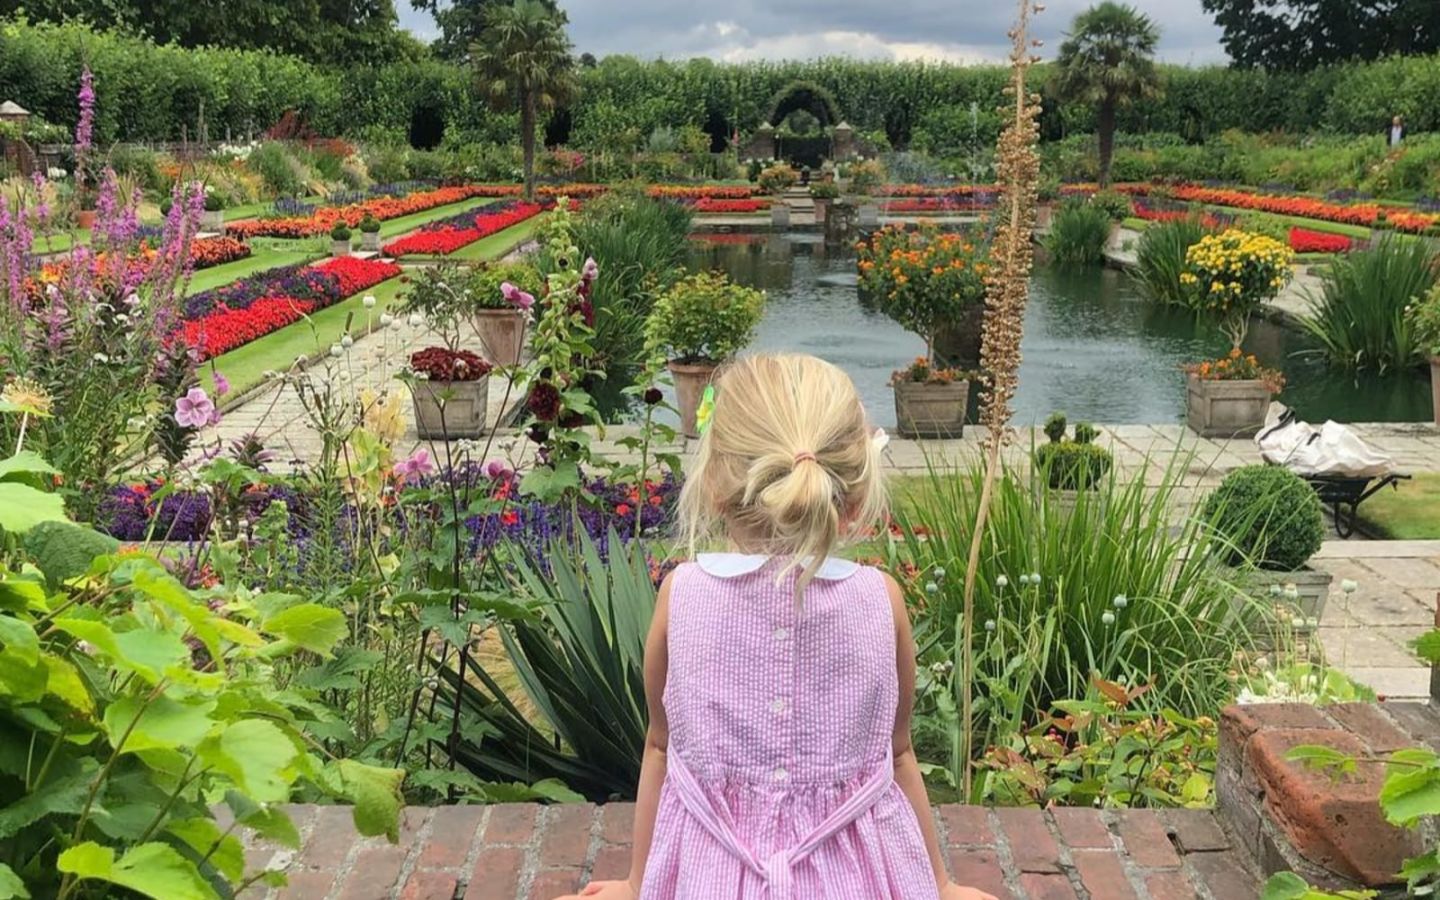 Holly Branson's daughter, Etta, overlooking a pond and landscaped gardens